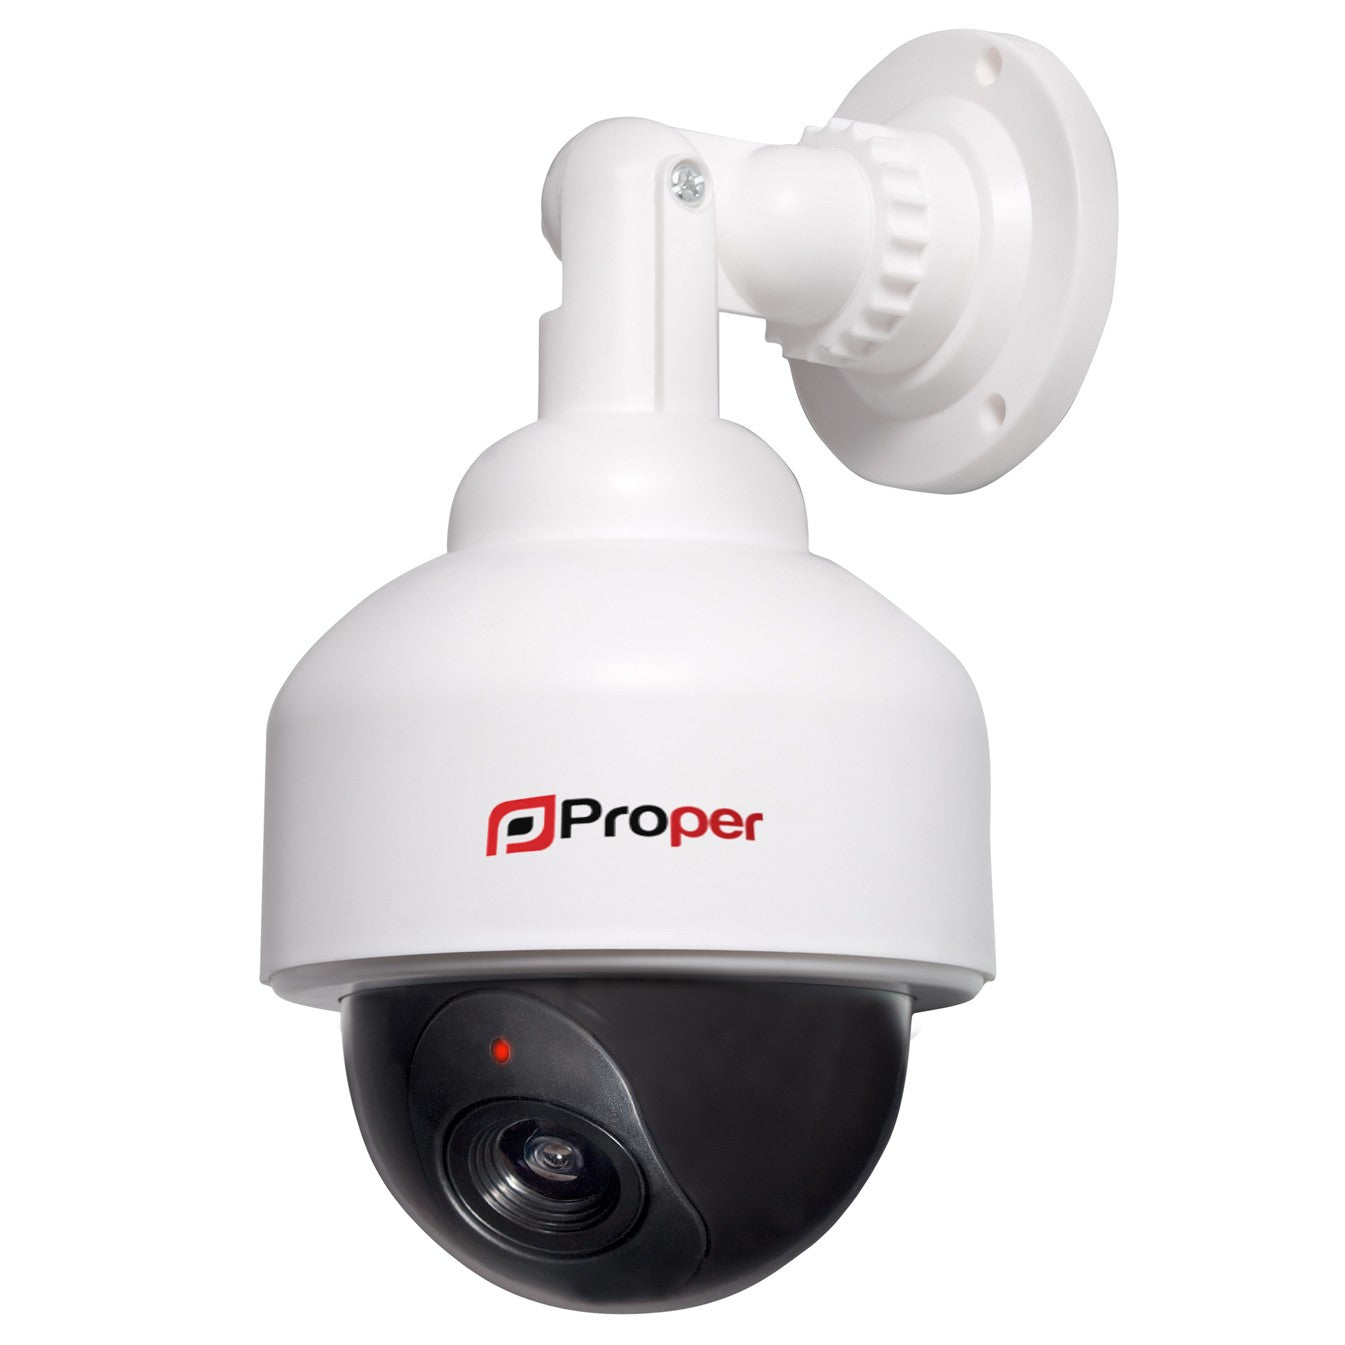 ProperAV Replica Security Speed Dome Camera with Flashing Light - White